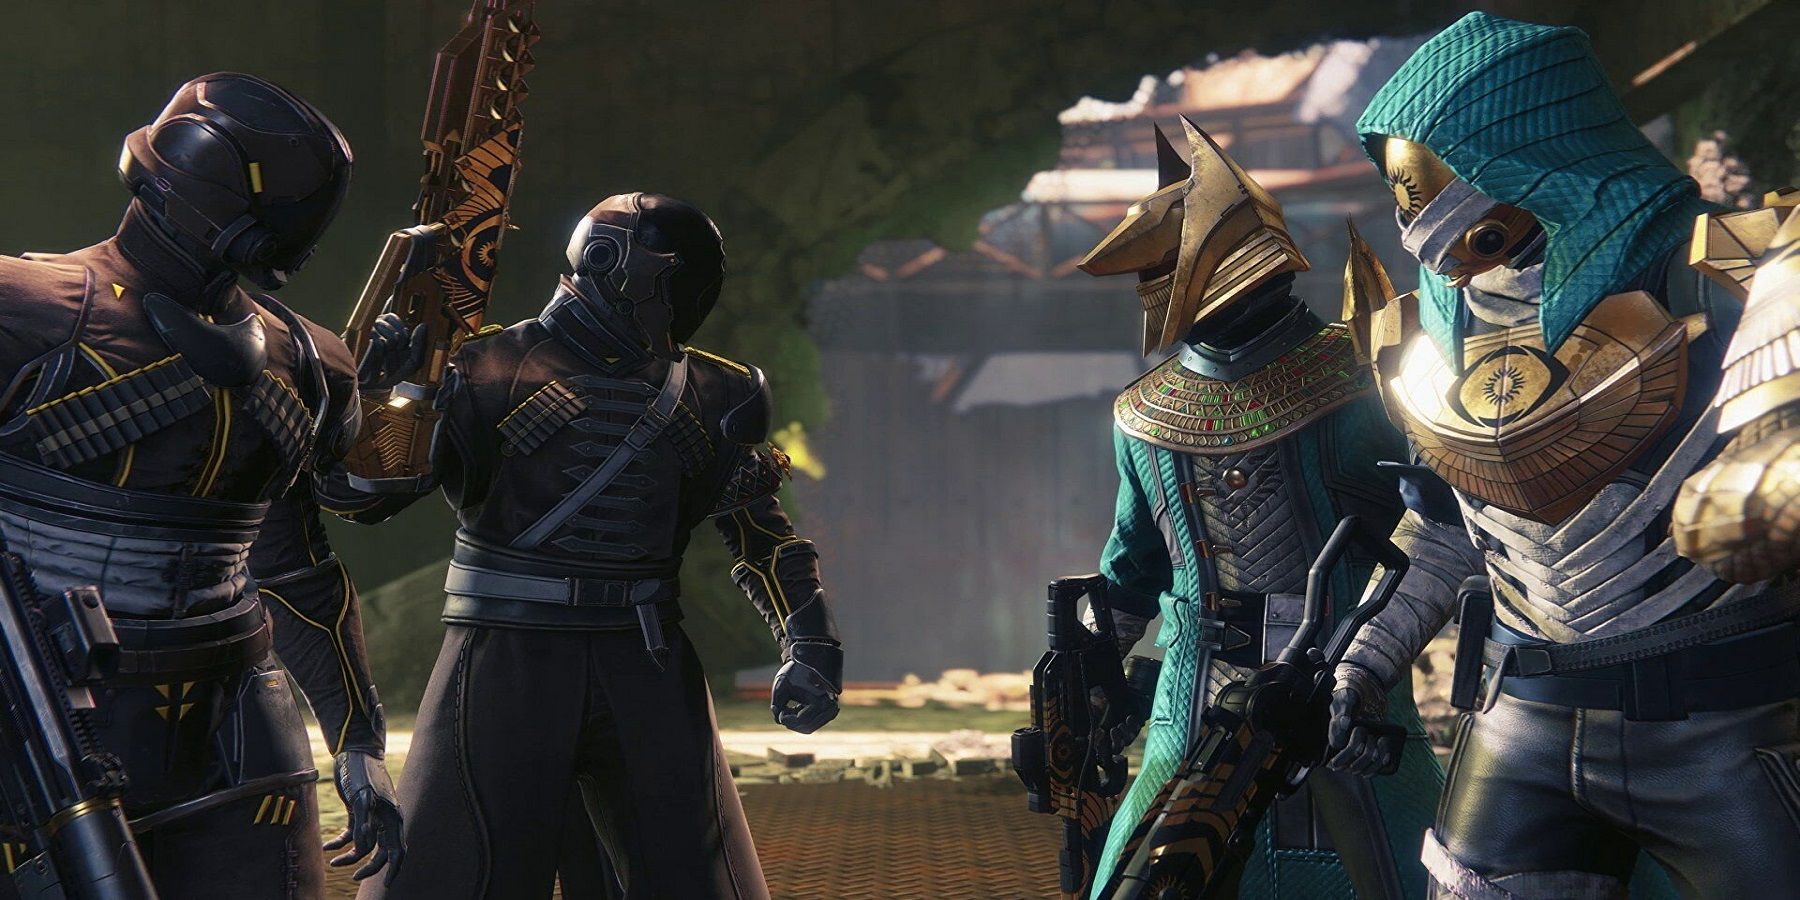 Destiny 2 players got a glimpse at the new Trials armor, and a bit more, coming in Season 17,